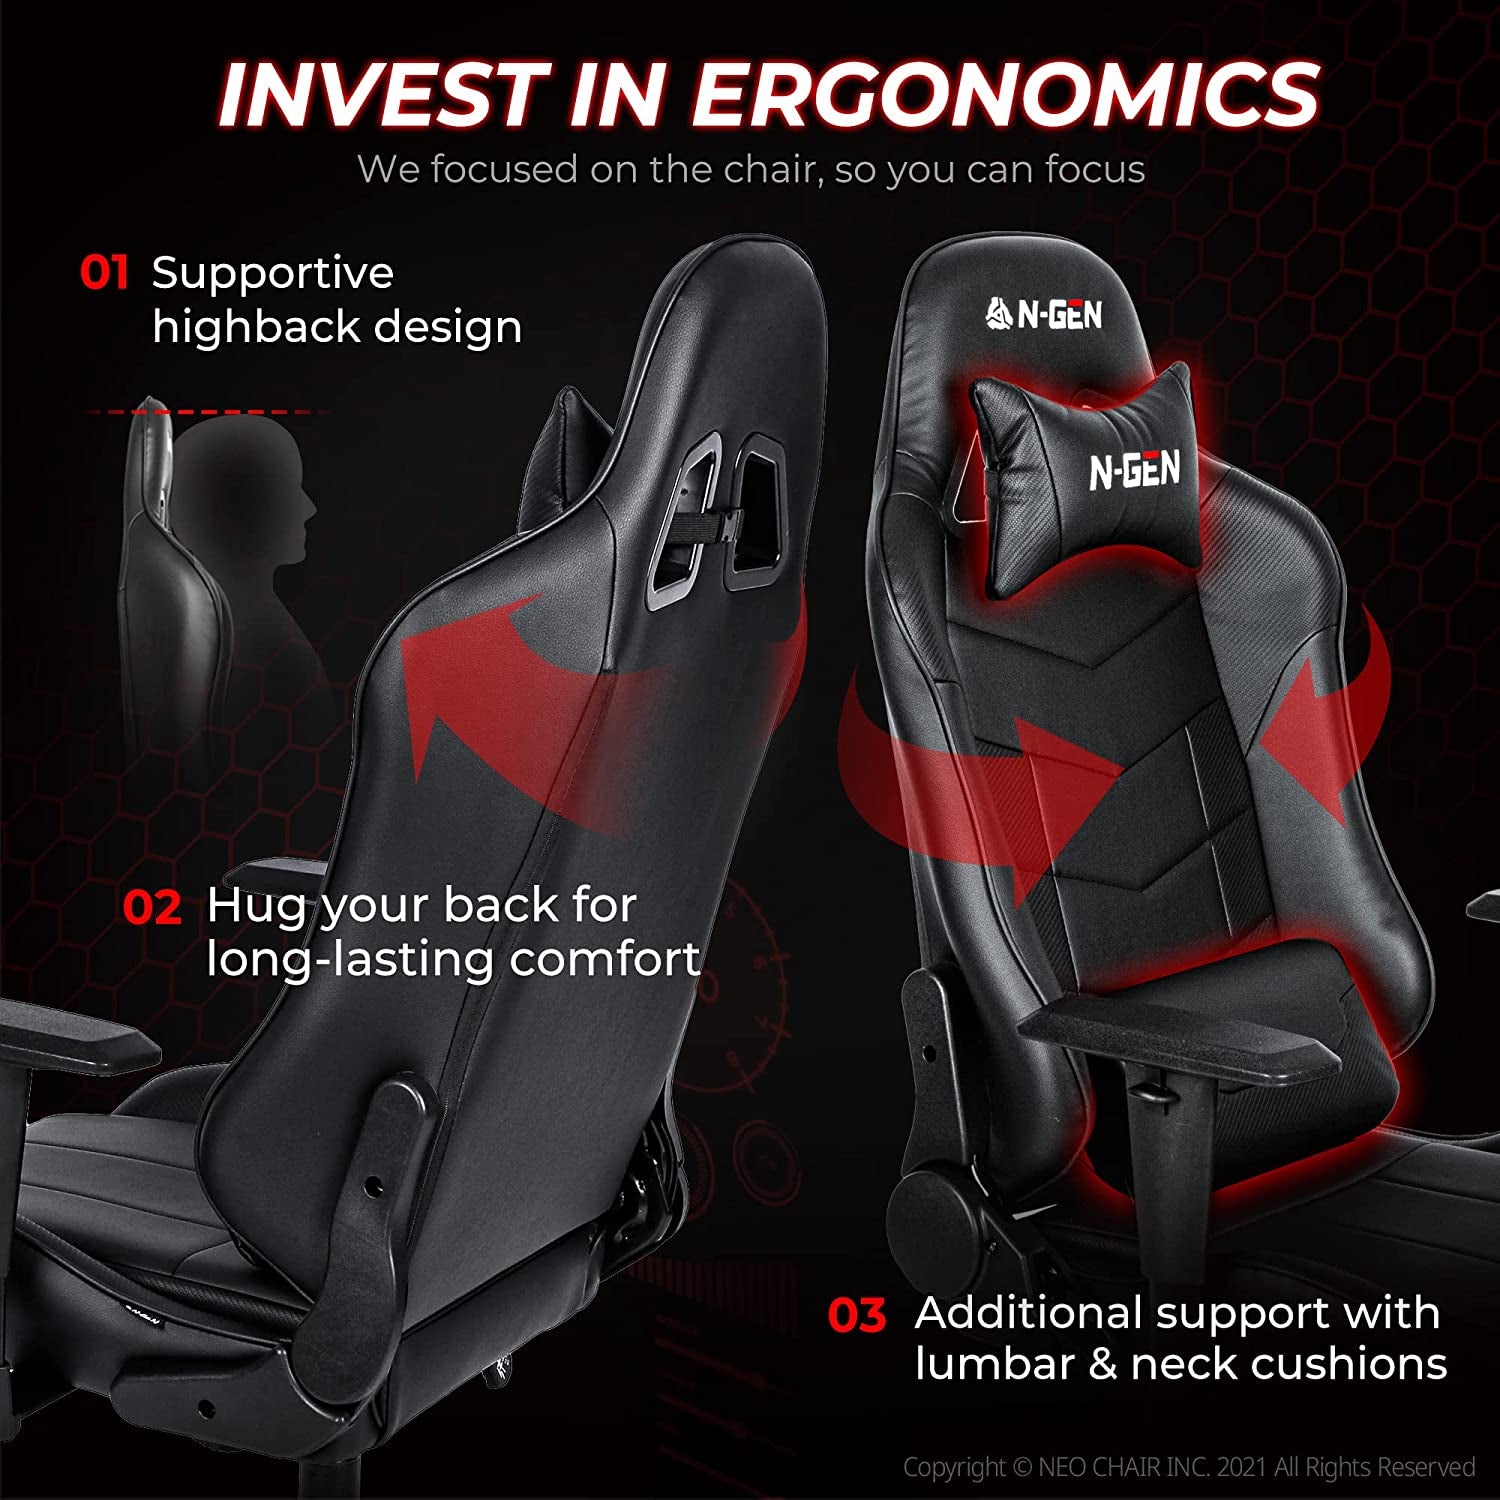 N-GEN Gaming Chair Computer Ergonomic Office Adjustable Lumbar Support Racing Style High Back Desk Swivel Executive Video Game PC Leather Height Reclining with Footrest (2. Black)